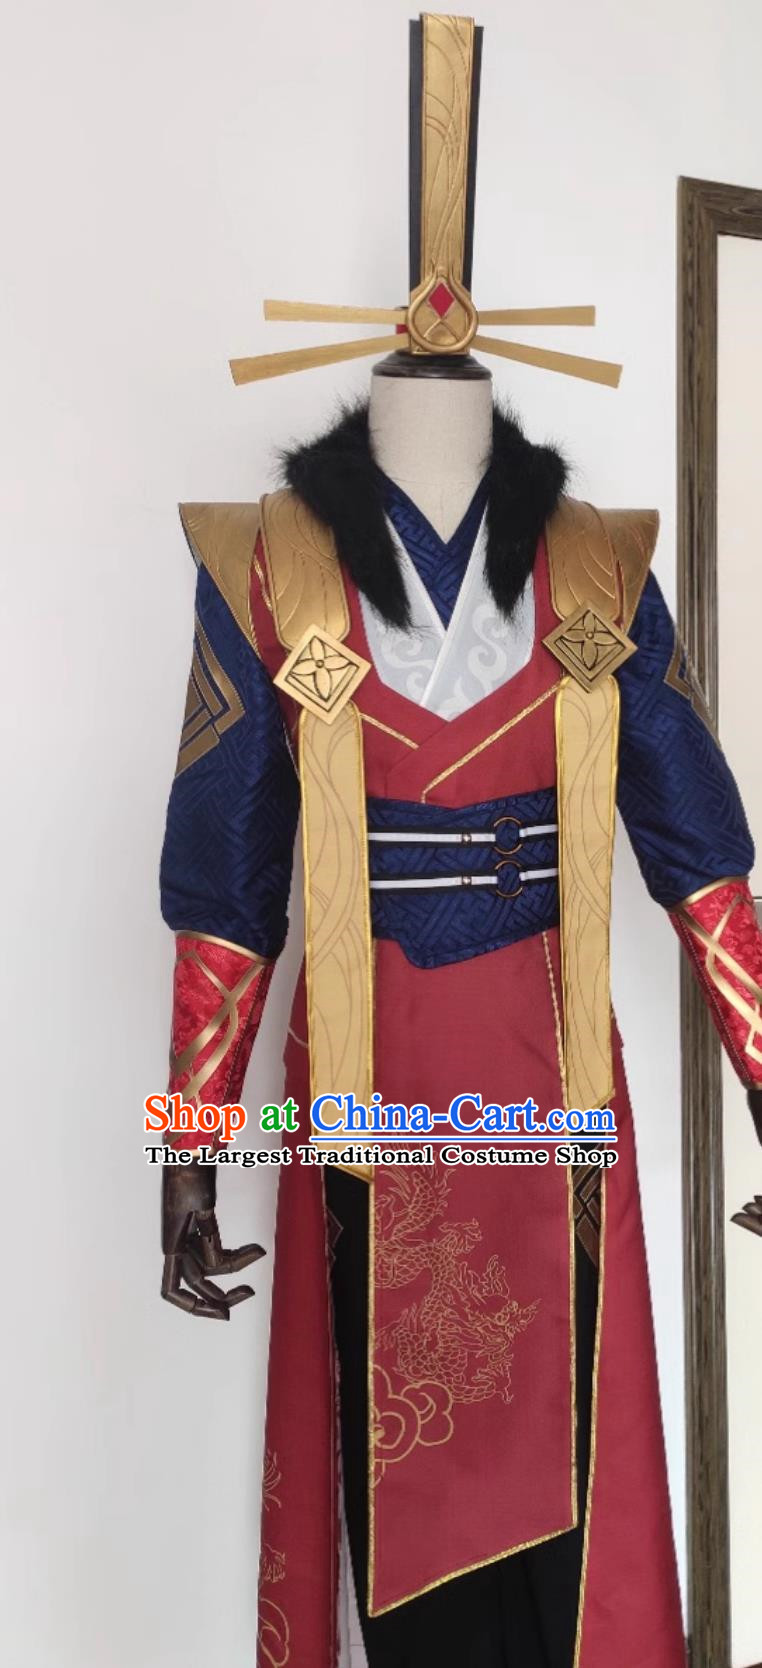 The Bad Person In The World of Painting Jianghu Cos Bad Person Cos Qi Wang Cos Li Maozhen Costume